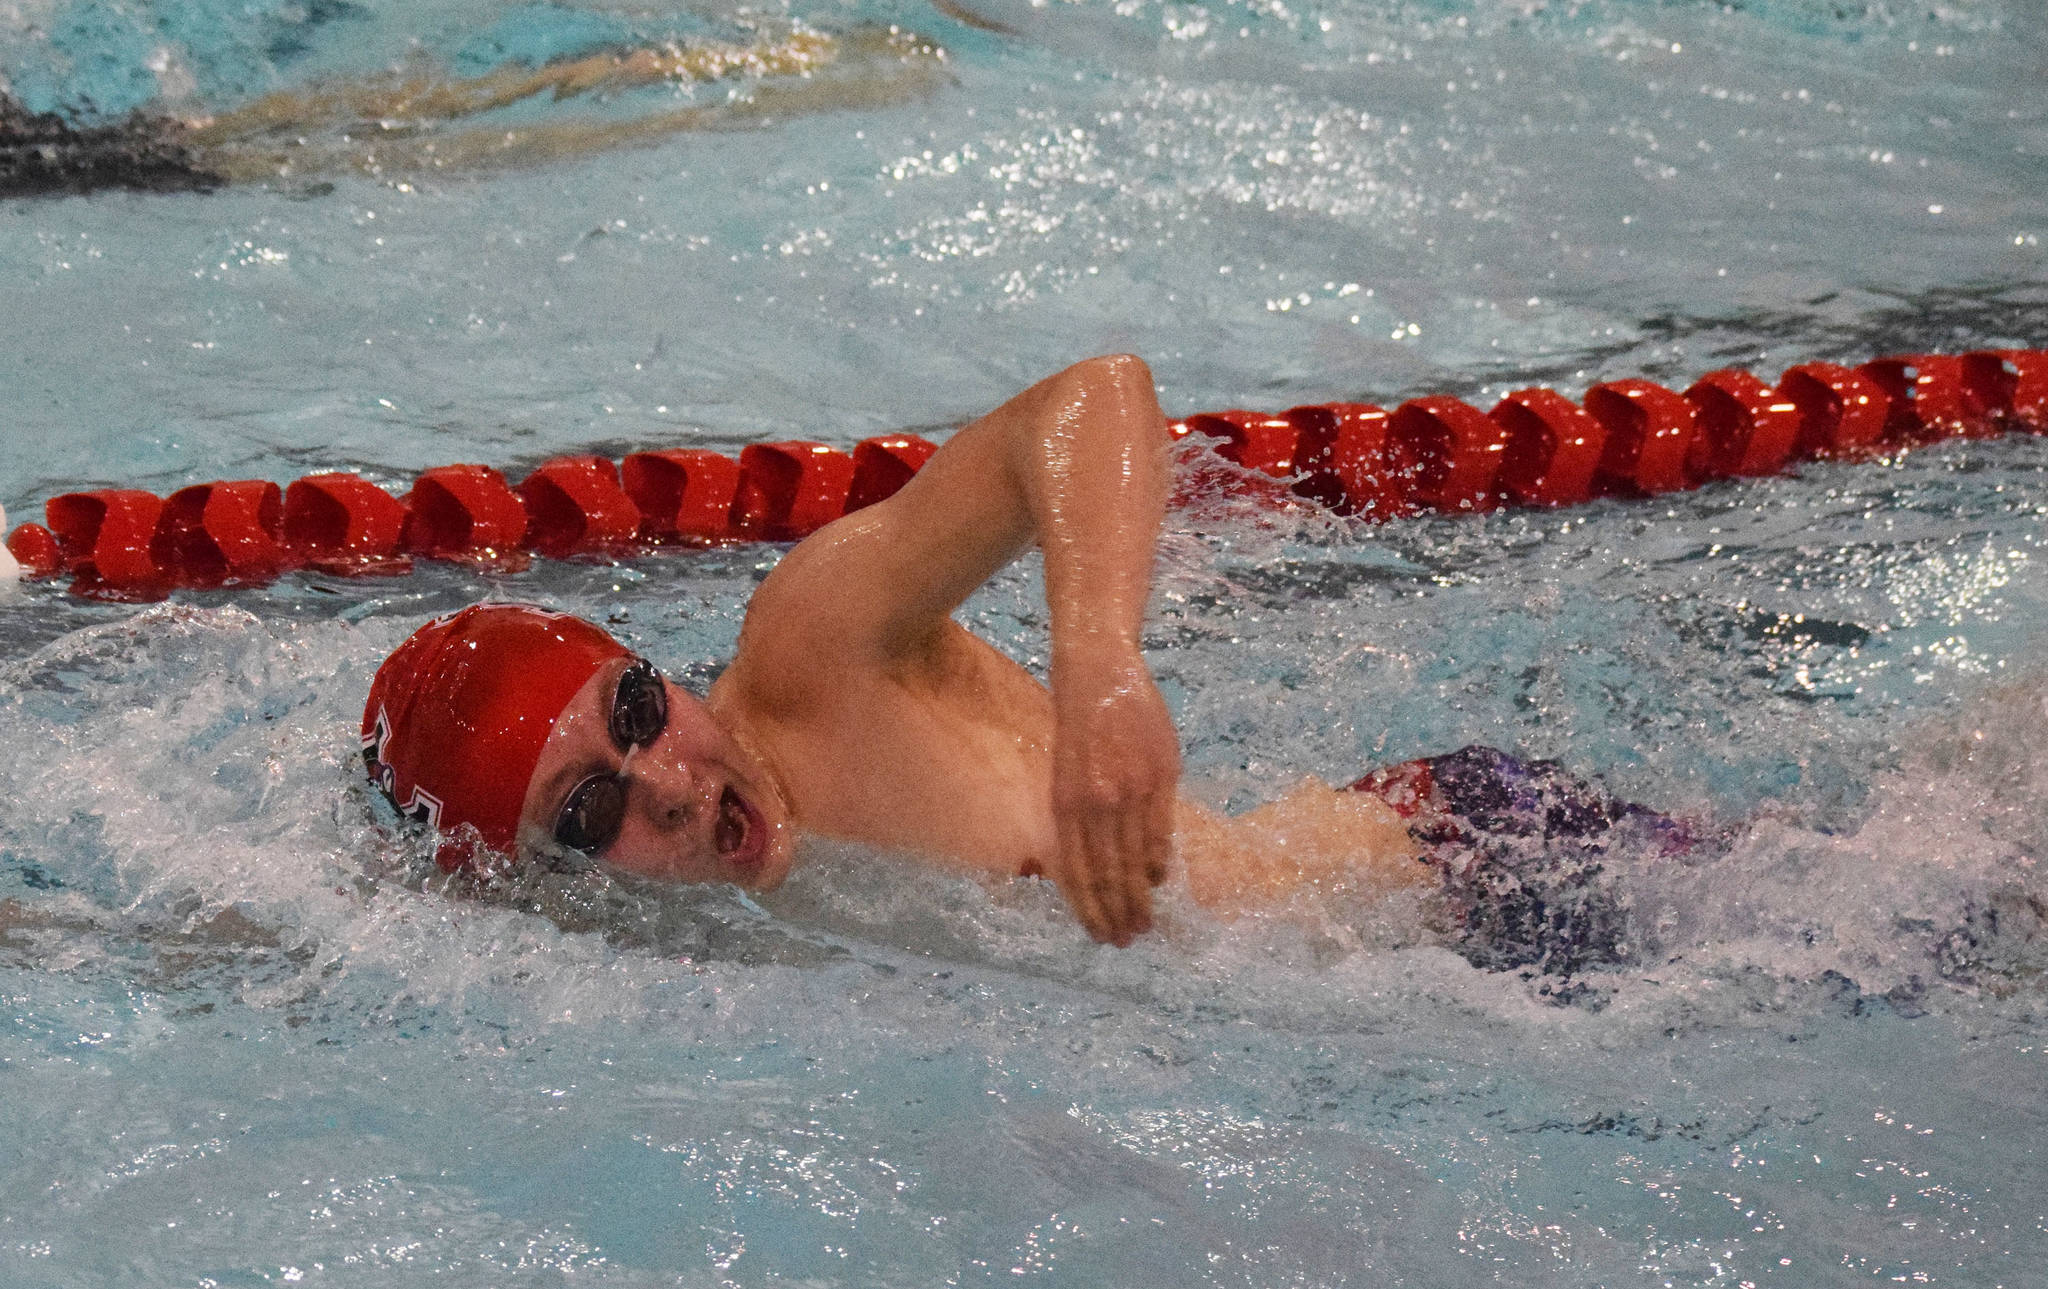 Kenai’s Koda Poulin races in the boys 500-yard freestyle event Saturday, Nov. 2, 2019, at the Northern Lights Conference swimming and diving championships at Kenai Central High School. (Photo by Joey Klecka/Peninsula Clarion)